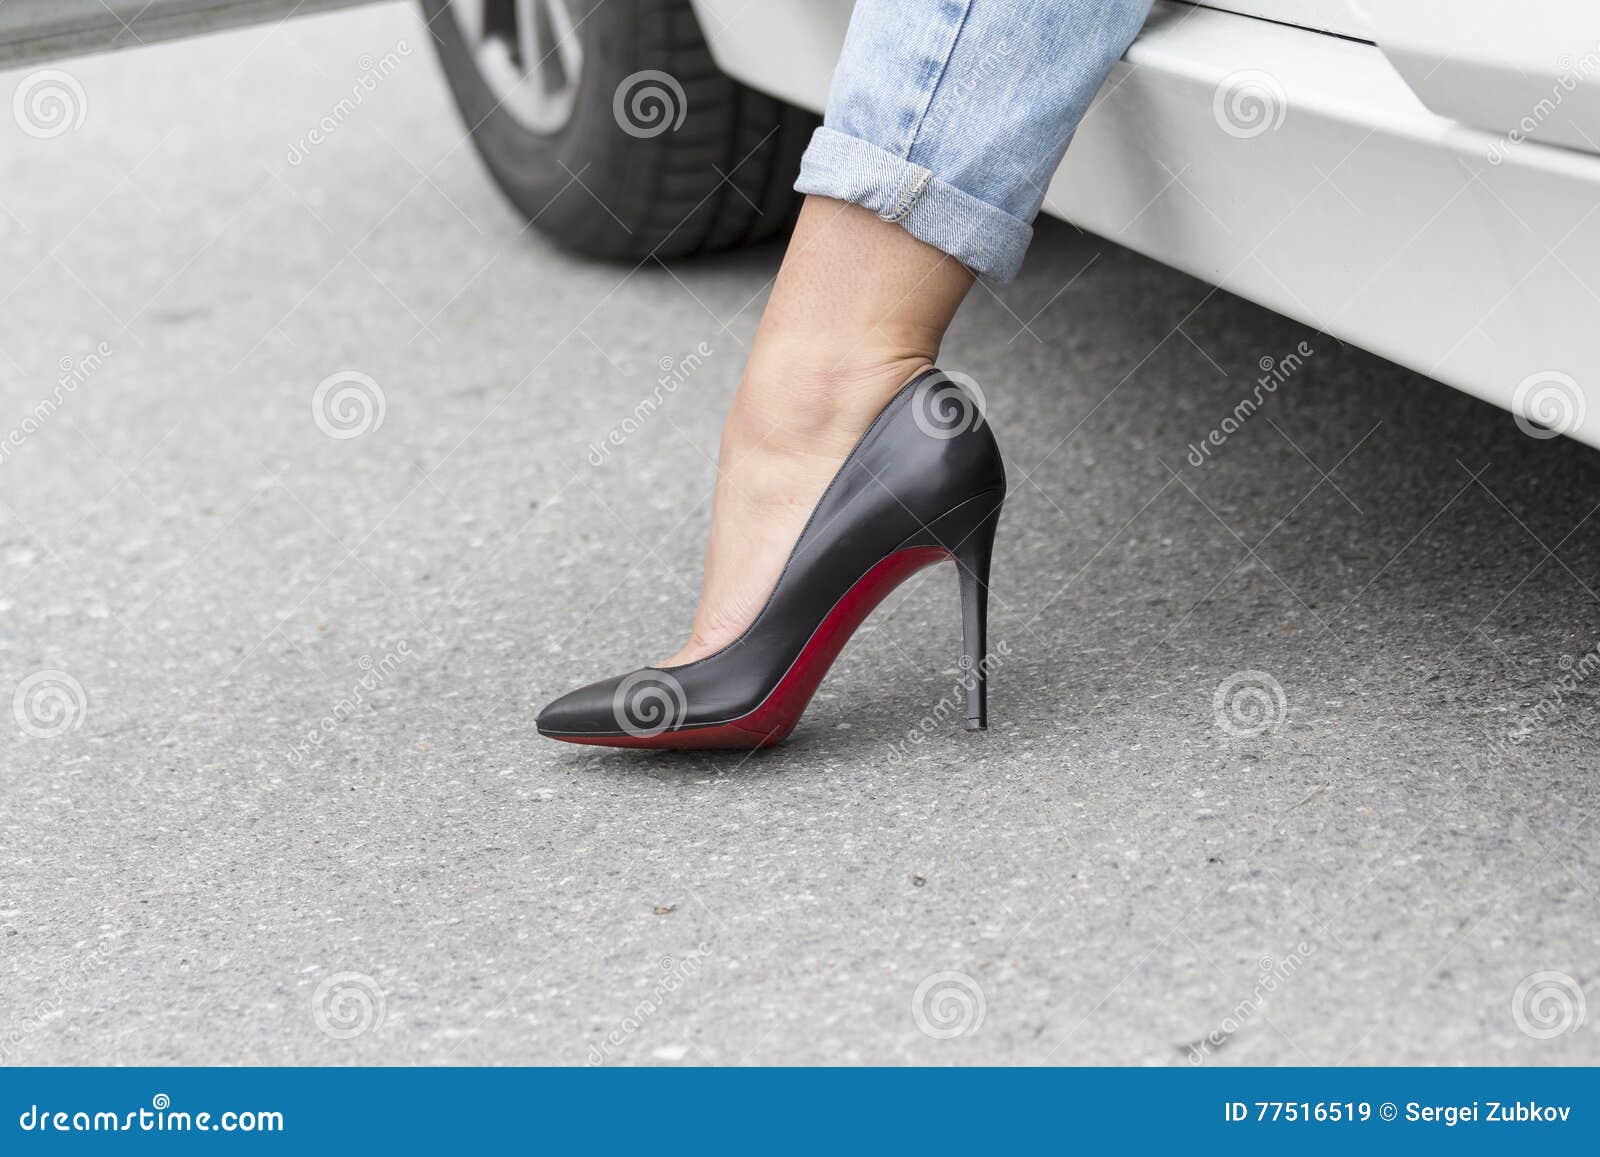 Foot girls on the road stock image. Image of jeans, business - 77516519